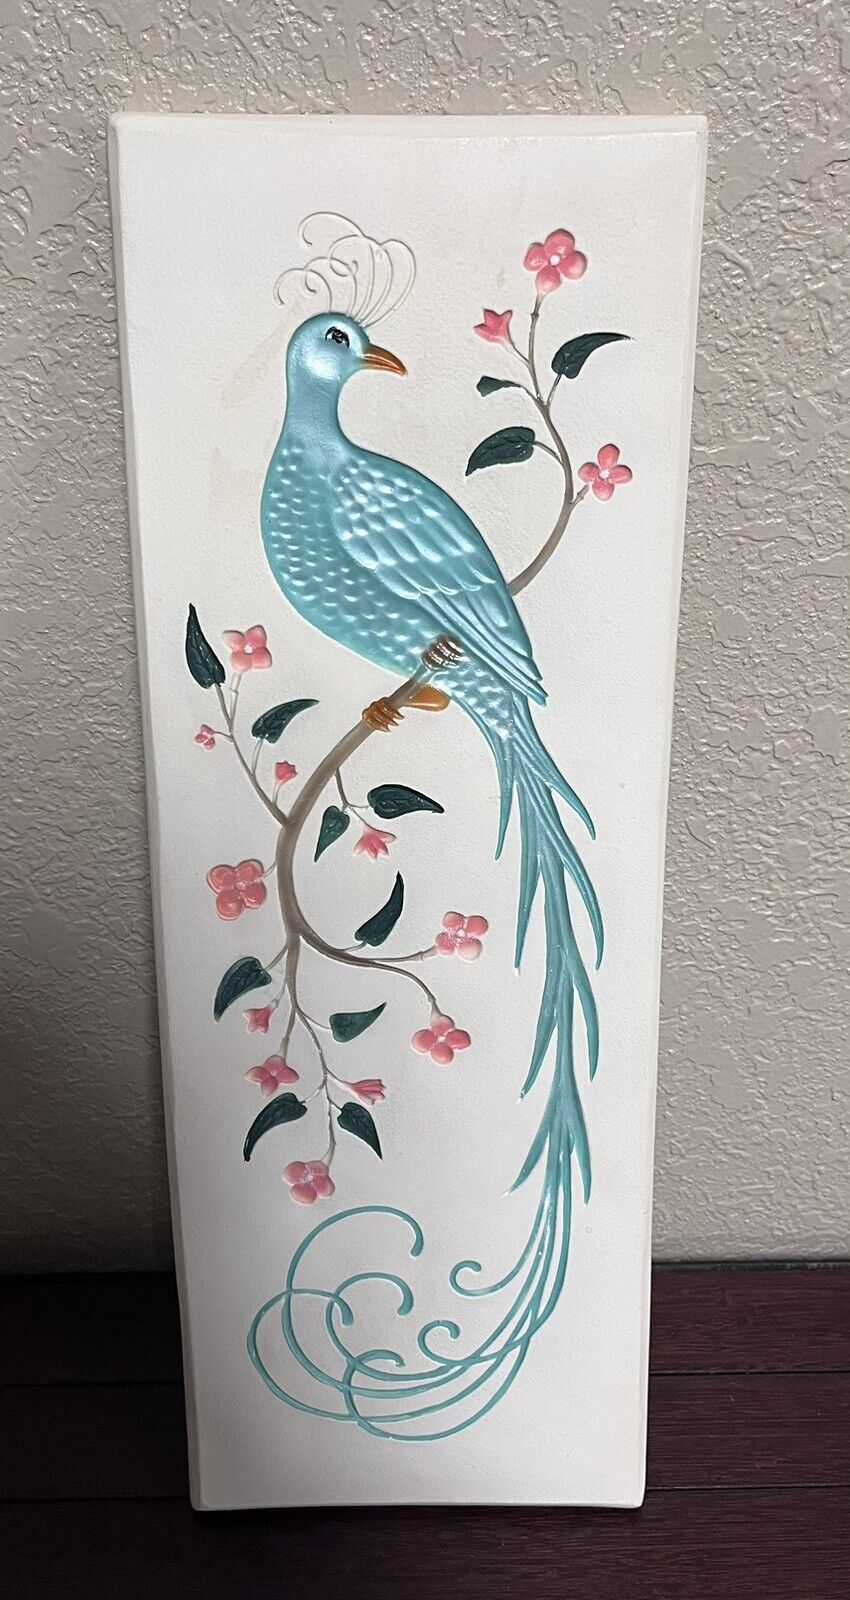 Vintage Coventry Ware Plaster Wall Plaque Bird Peacock Flowers 1950’s 20” Long